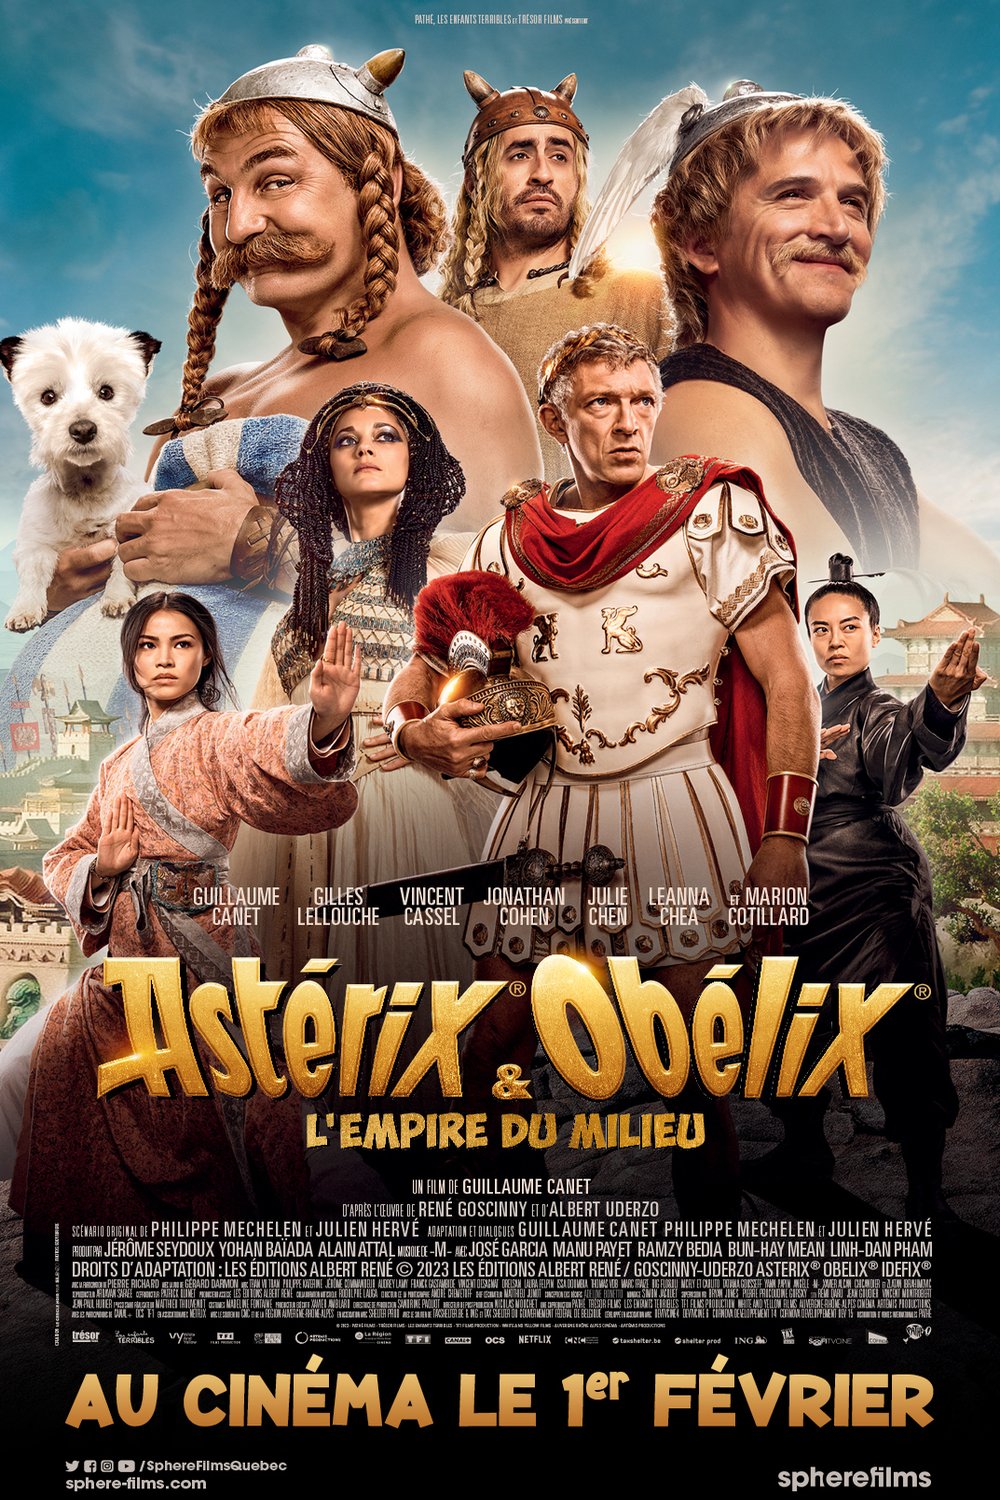 Poster of the movie Asterix & Obelix: The Middle Kingdom